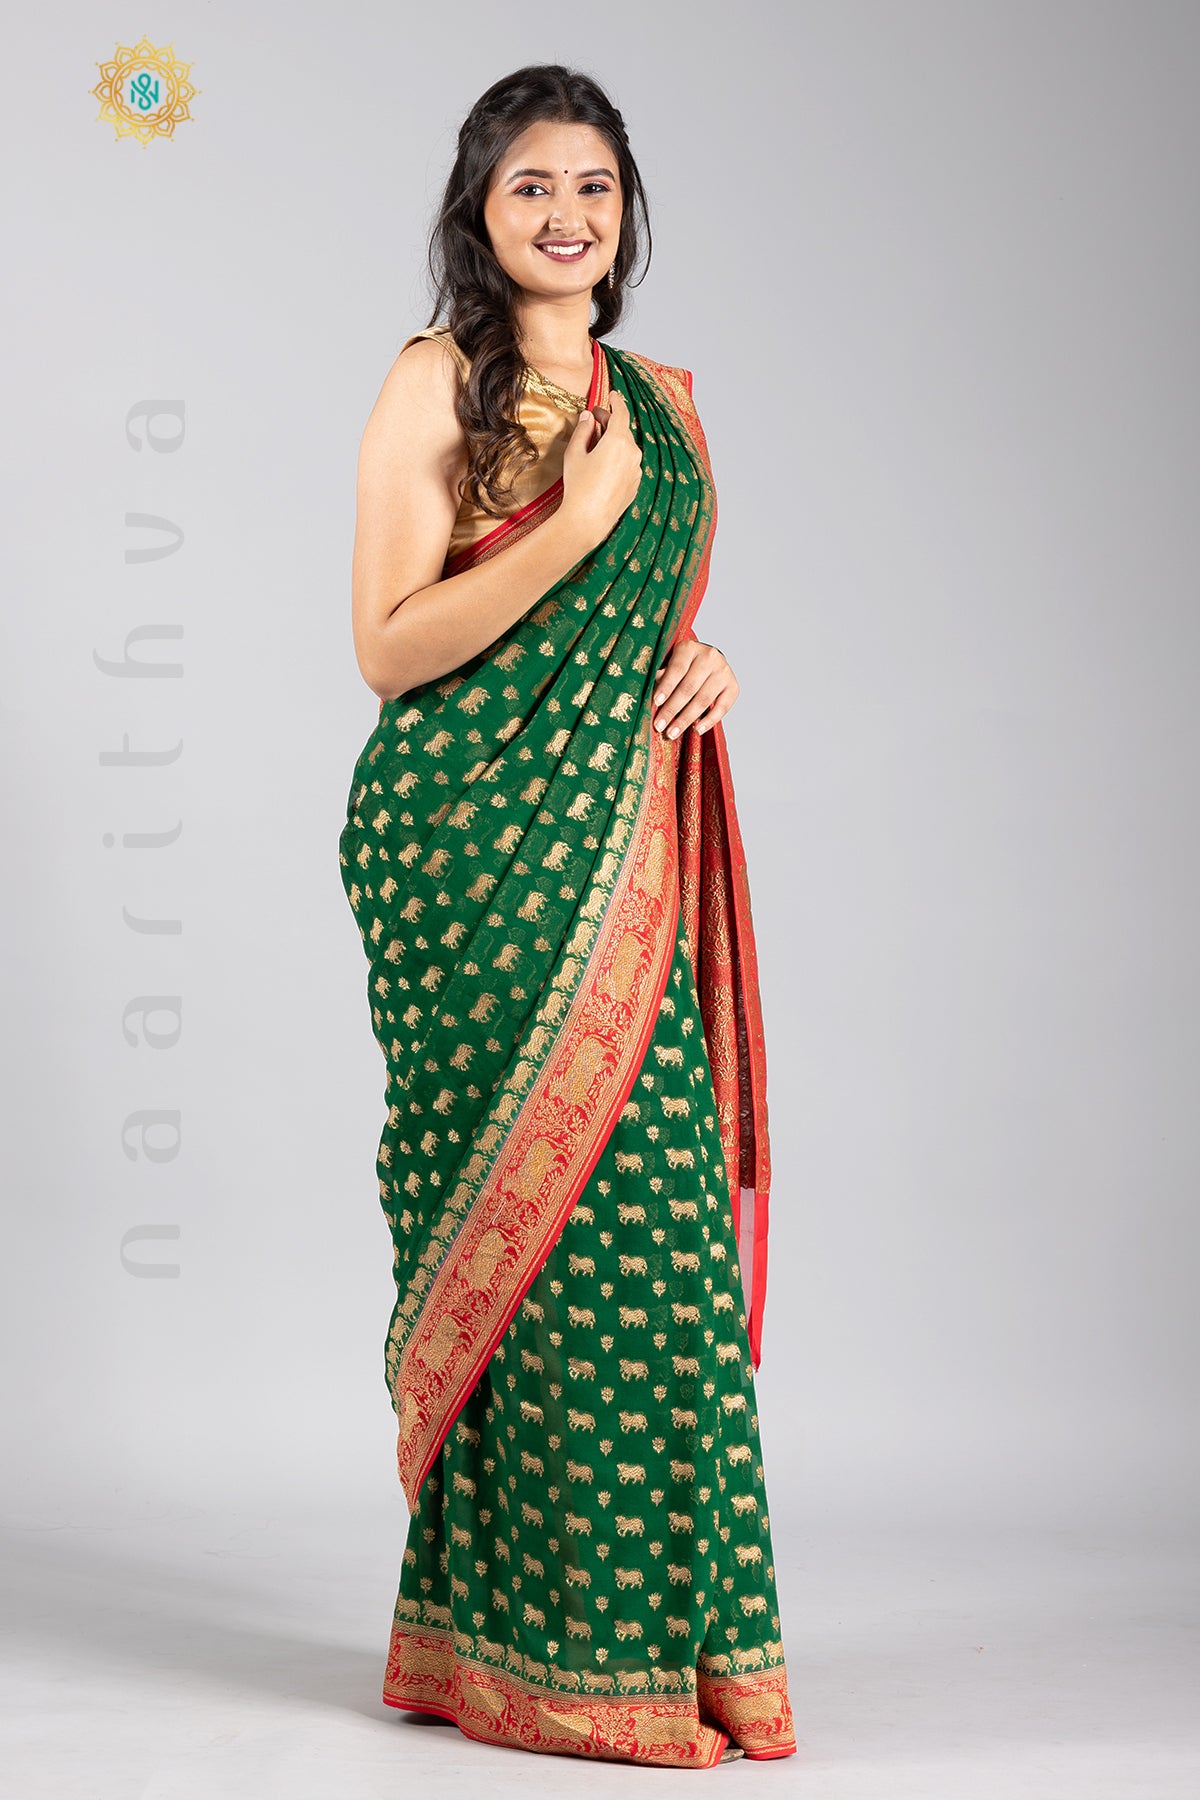 GREEN WITH RED - PURE HANDLOOM GEORGETTE BANARAS IN PICHWAI ANTIQUE ZARI WEAVING WITH CONTRAST BORDER & BLOUSE